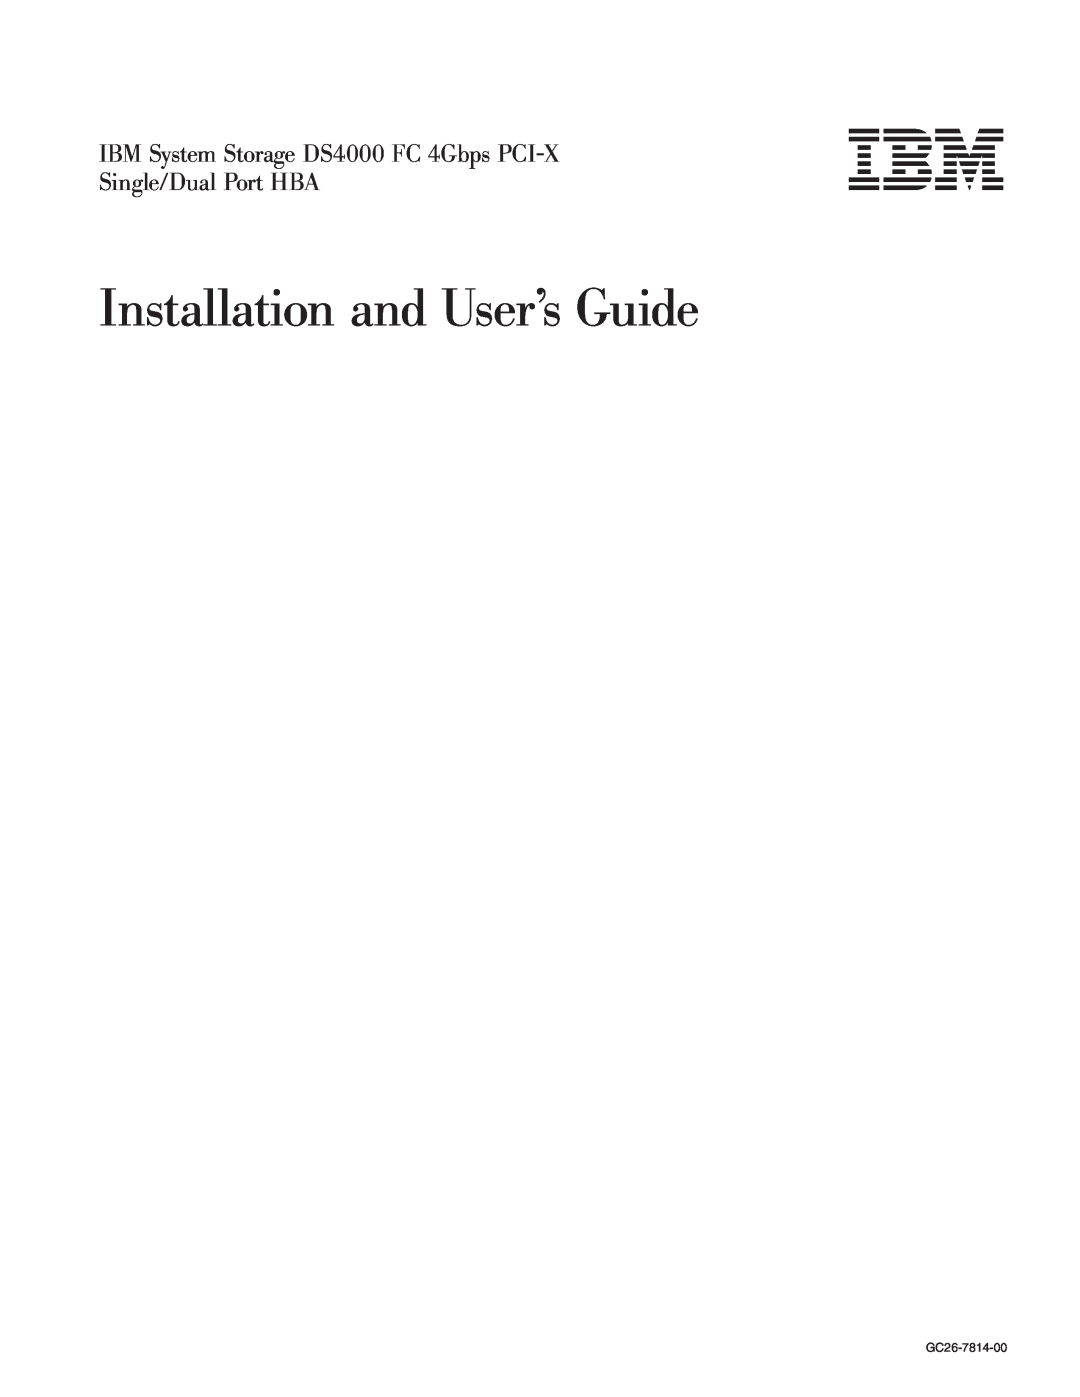 IBM manual Installation and User’s Guide, IBM System Storage DS4000 FC 4Gbps PCI-X, Single/Dual Port HBA, GC26-7814-00 